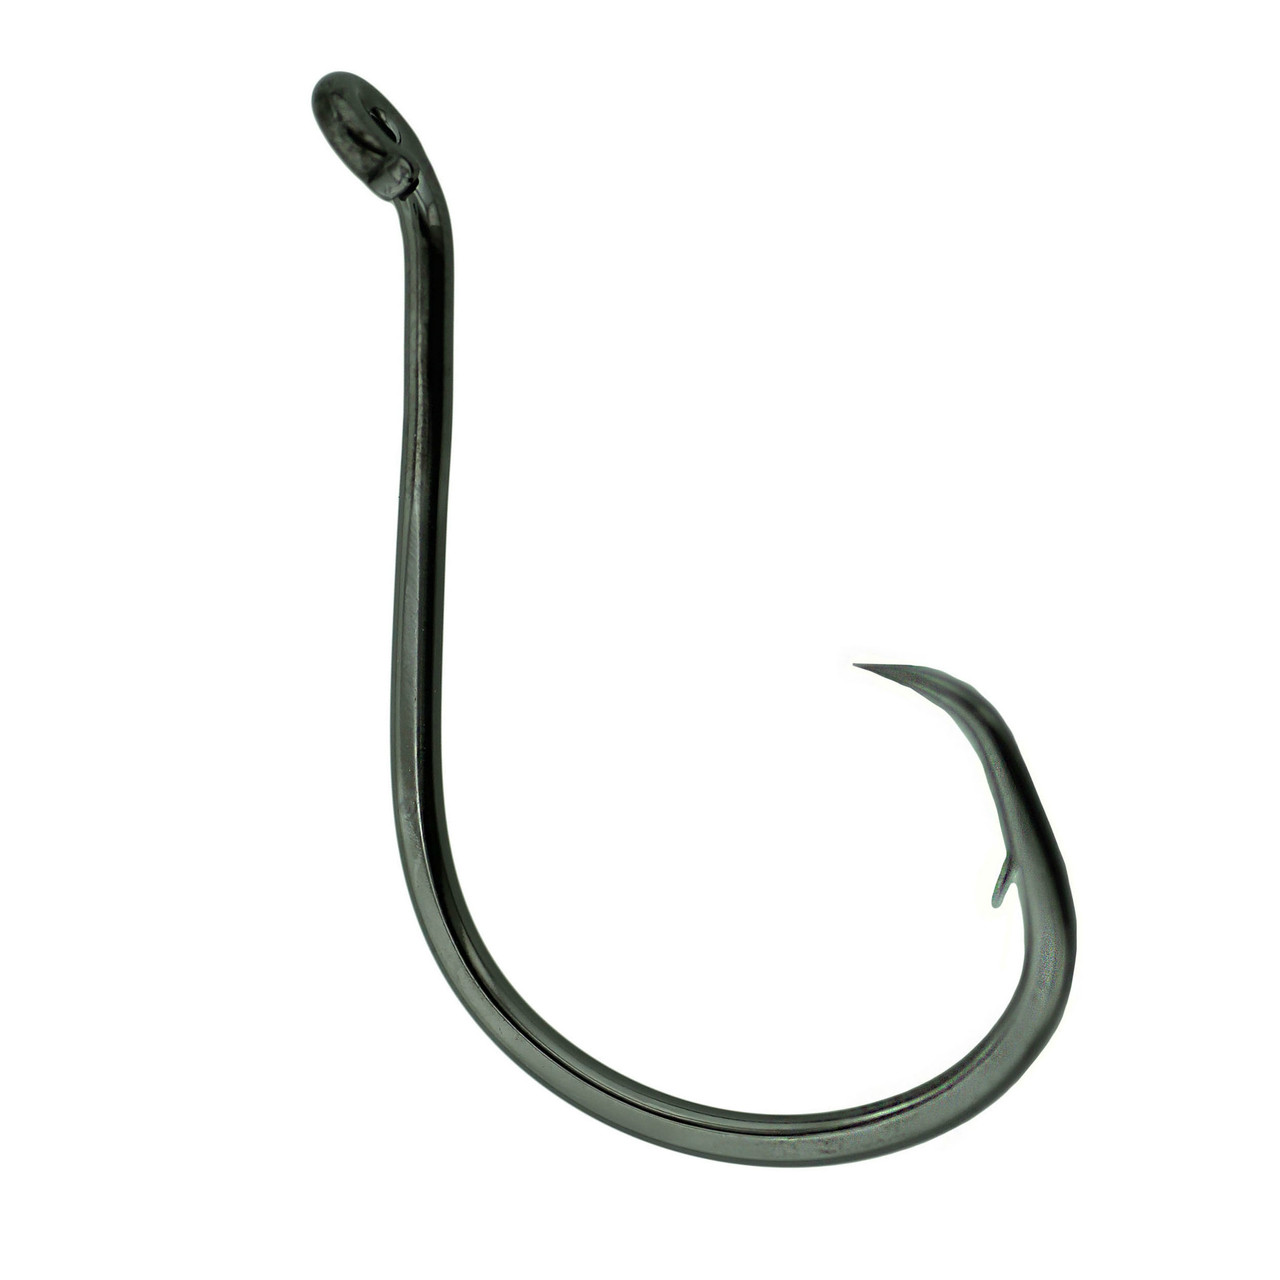 Gamakatsu Octopus Circle Fish Hooks-Size 2-Offset Point-Pack of 8 (208409)  - Go Outdoor Gear